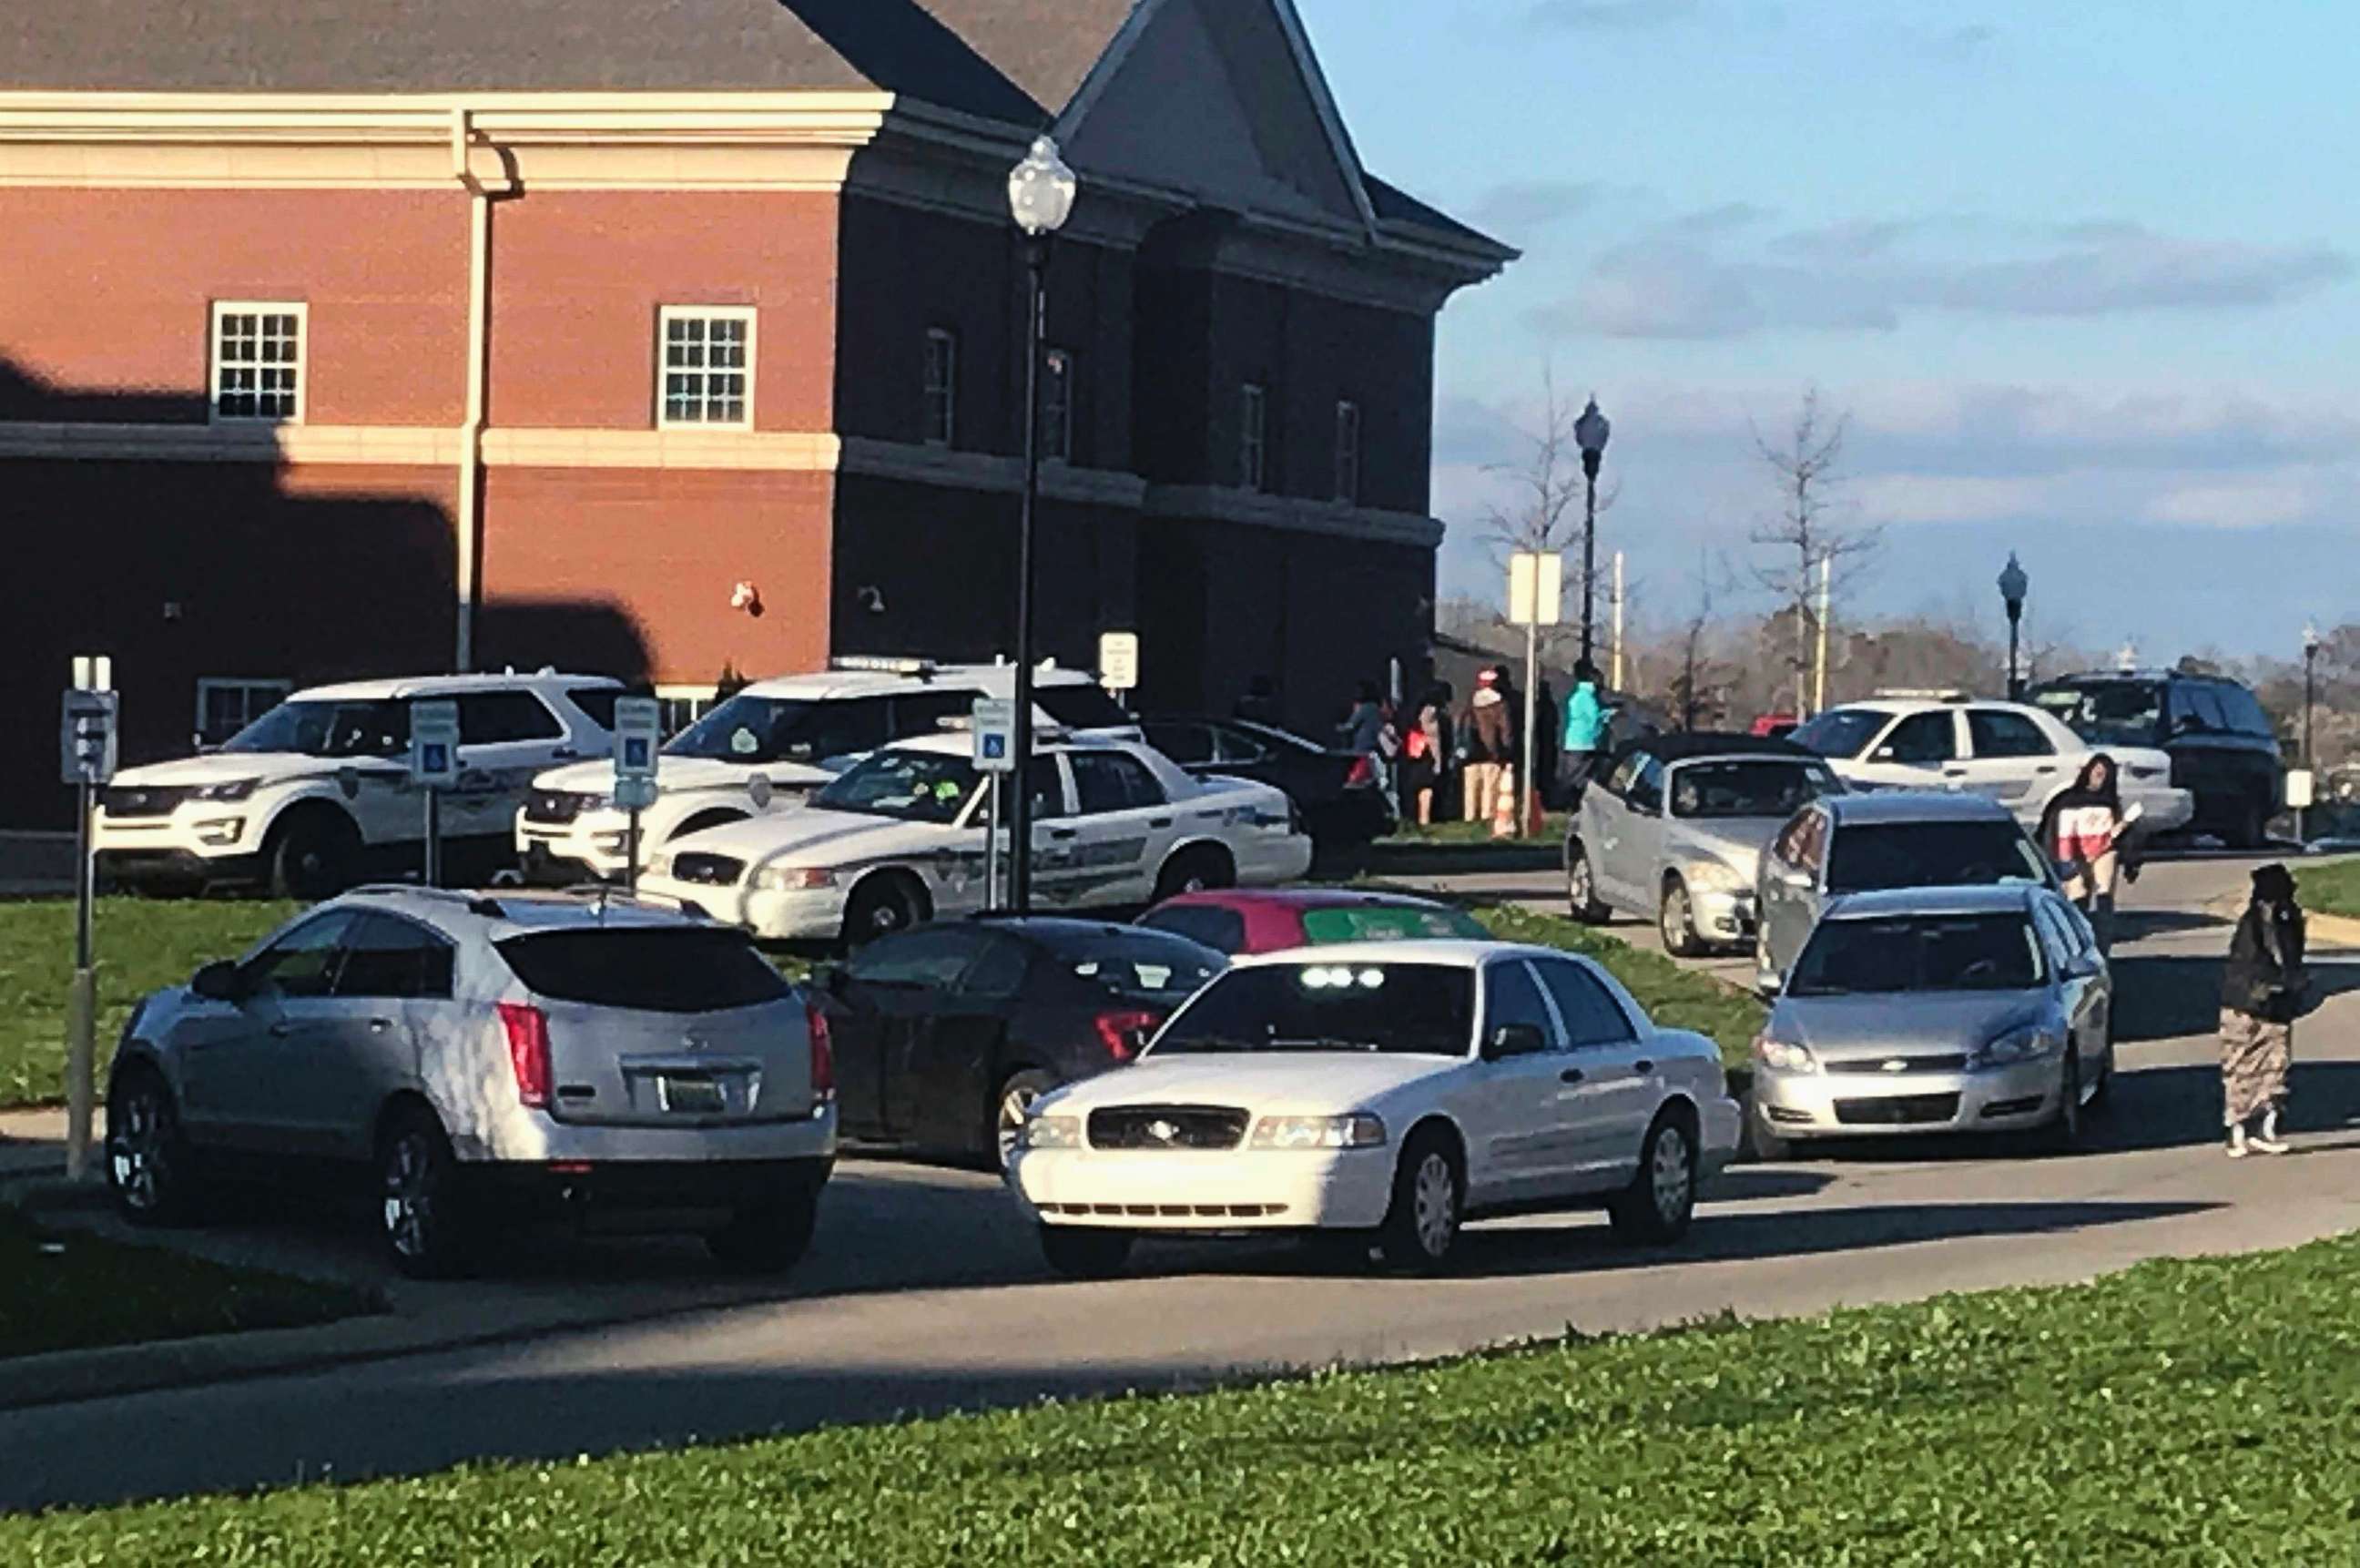 PHOTO: Authorities investigate the scene where a shooting occurred at Huffman High School, March 7, 2018, in Birmingham, Ala.